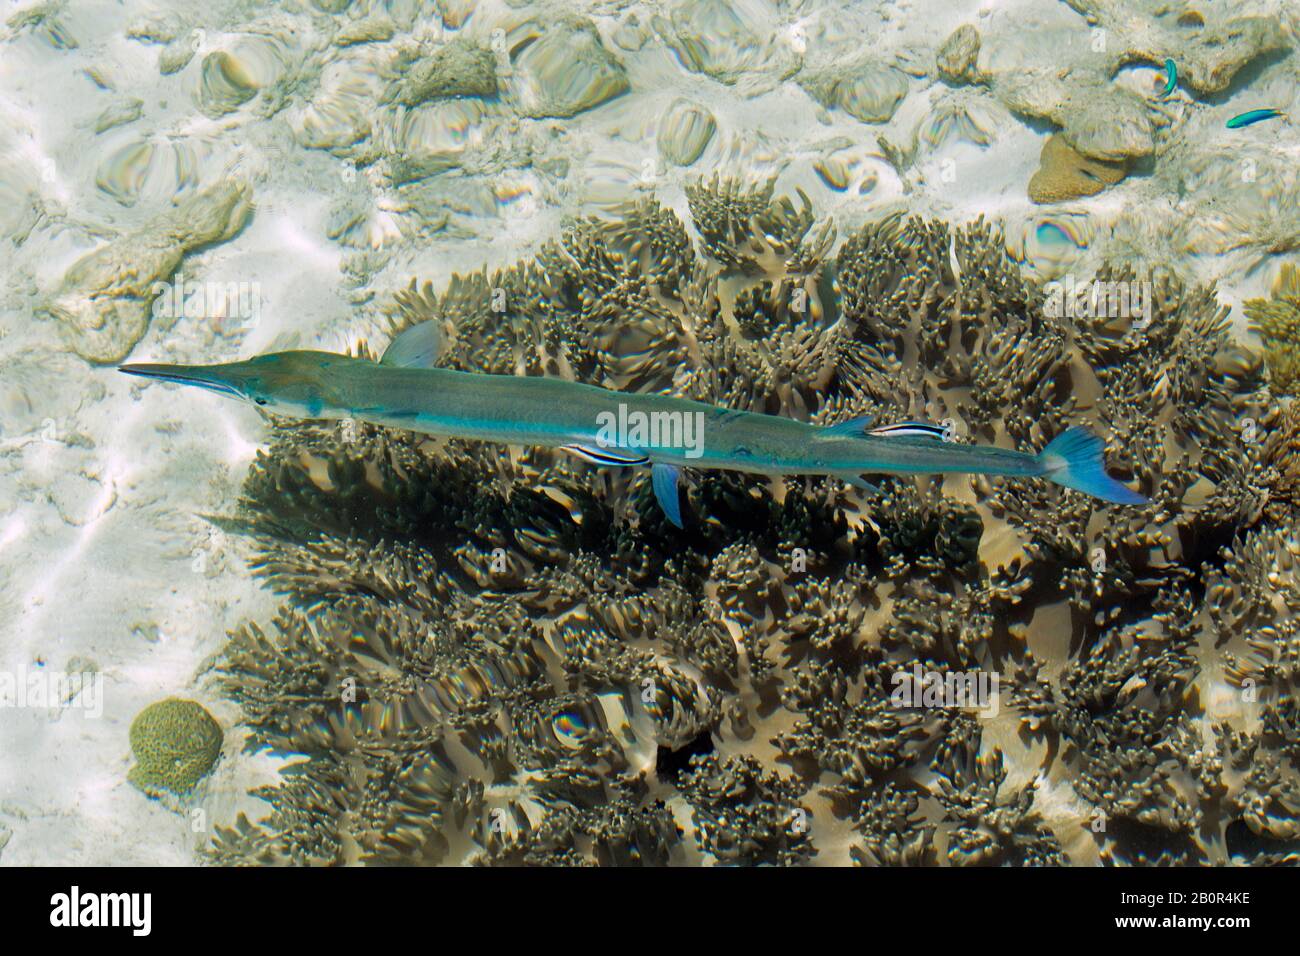 Bluespotted cornetfish, Fistularia commersonii, being cleaned by bluestreak cleaner wrasses, Labroides dimidiatus, Kapalai, Malaysia Stock Photo